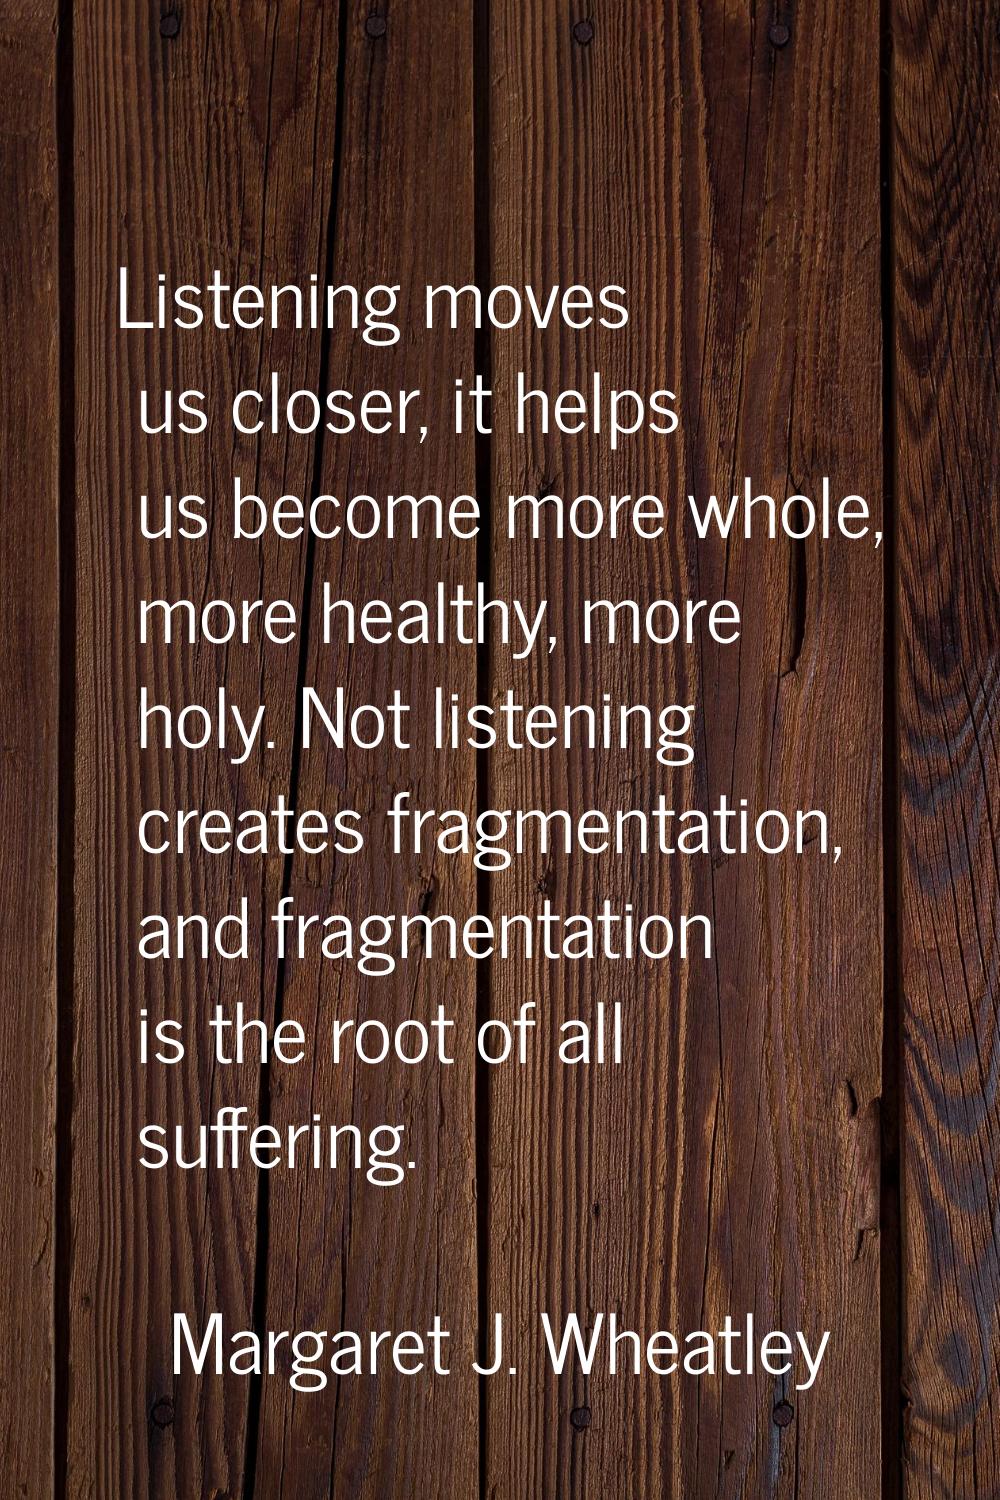 Listening moves us closer, it helps us become more whole, more healthy, more holy. Not listening cr